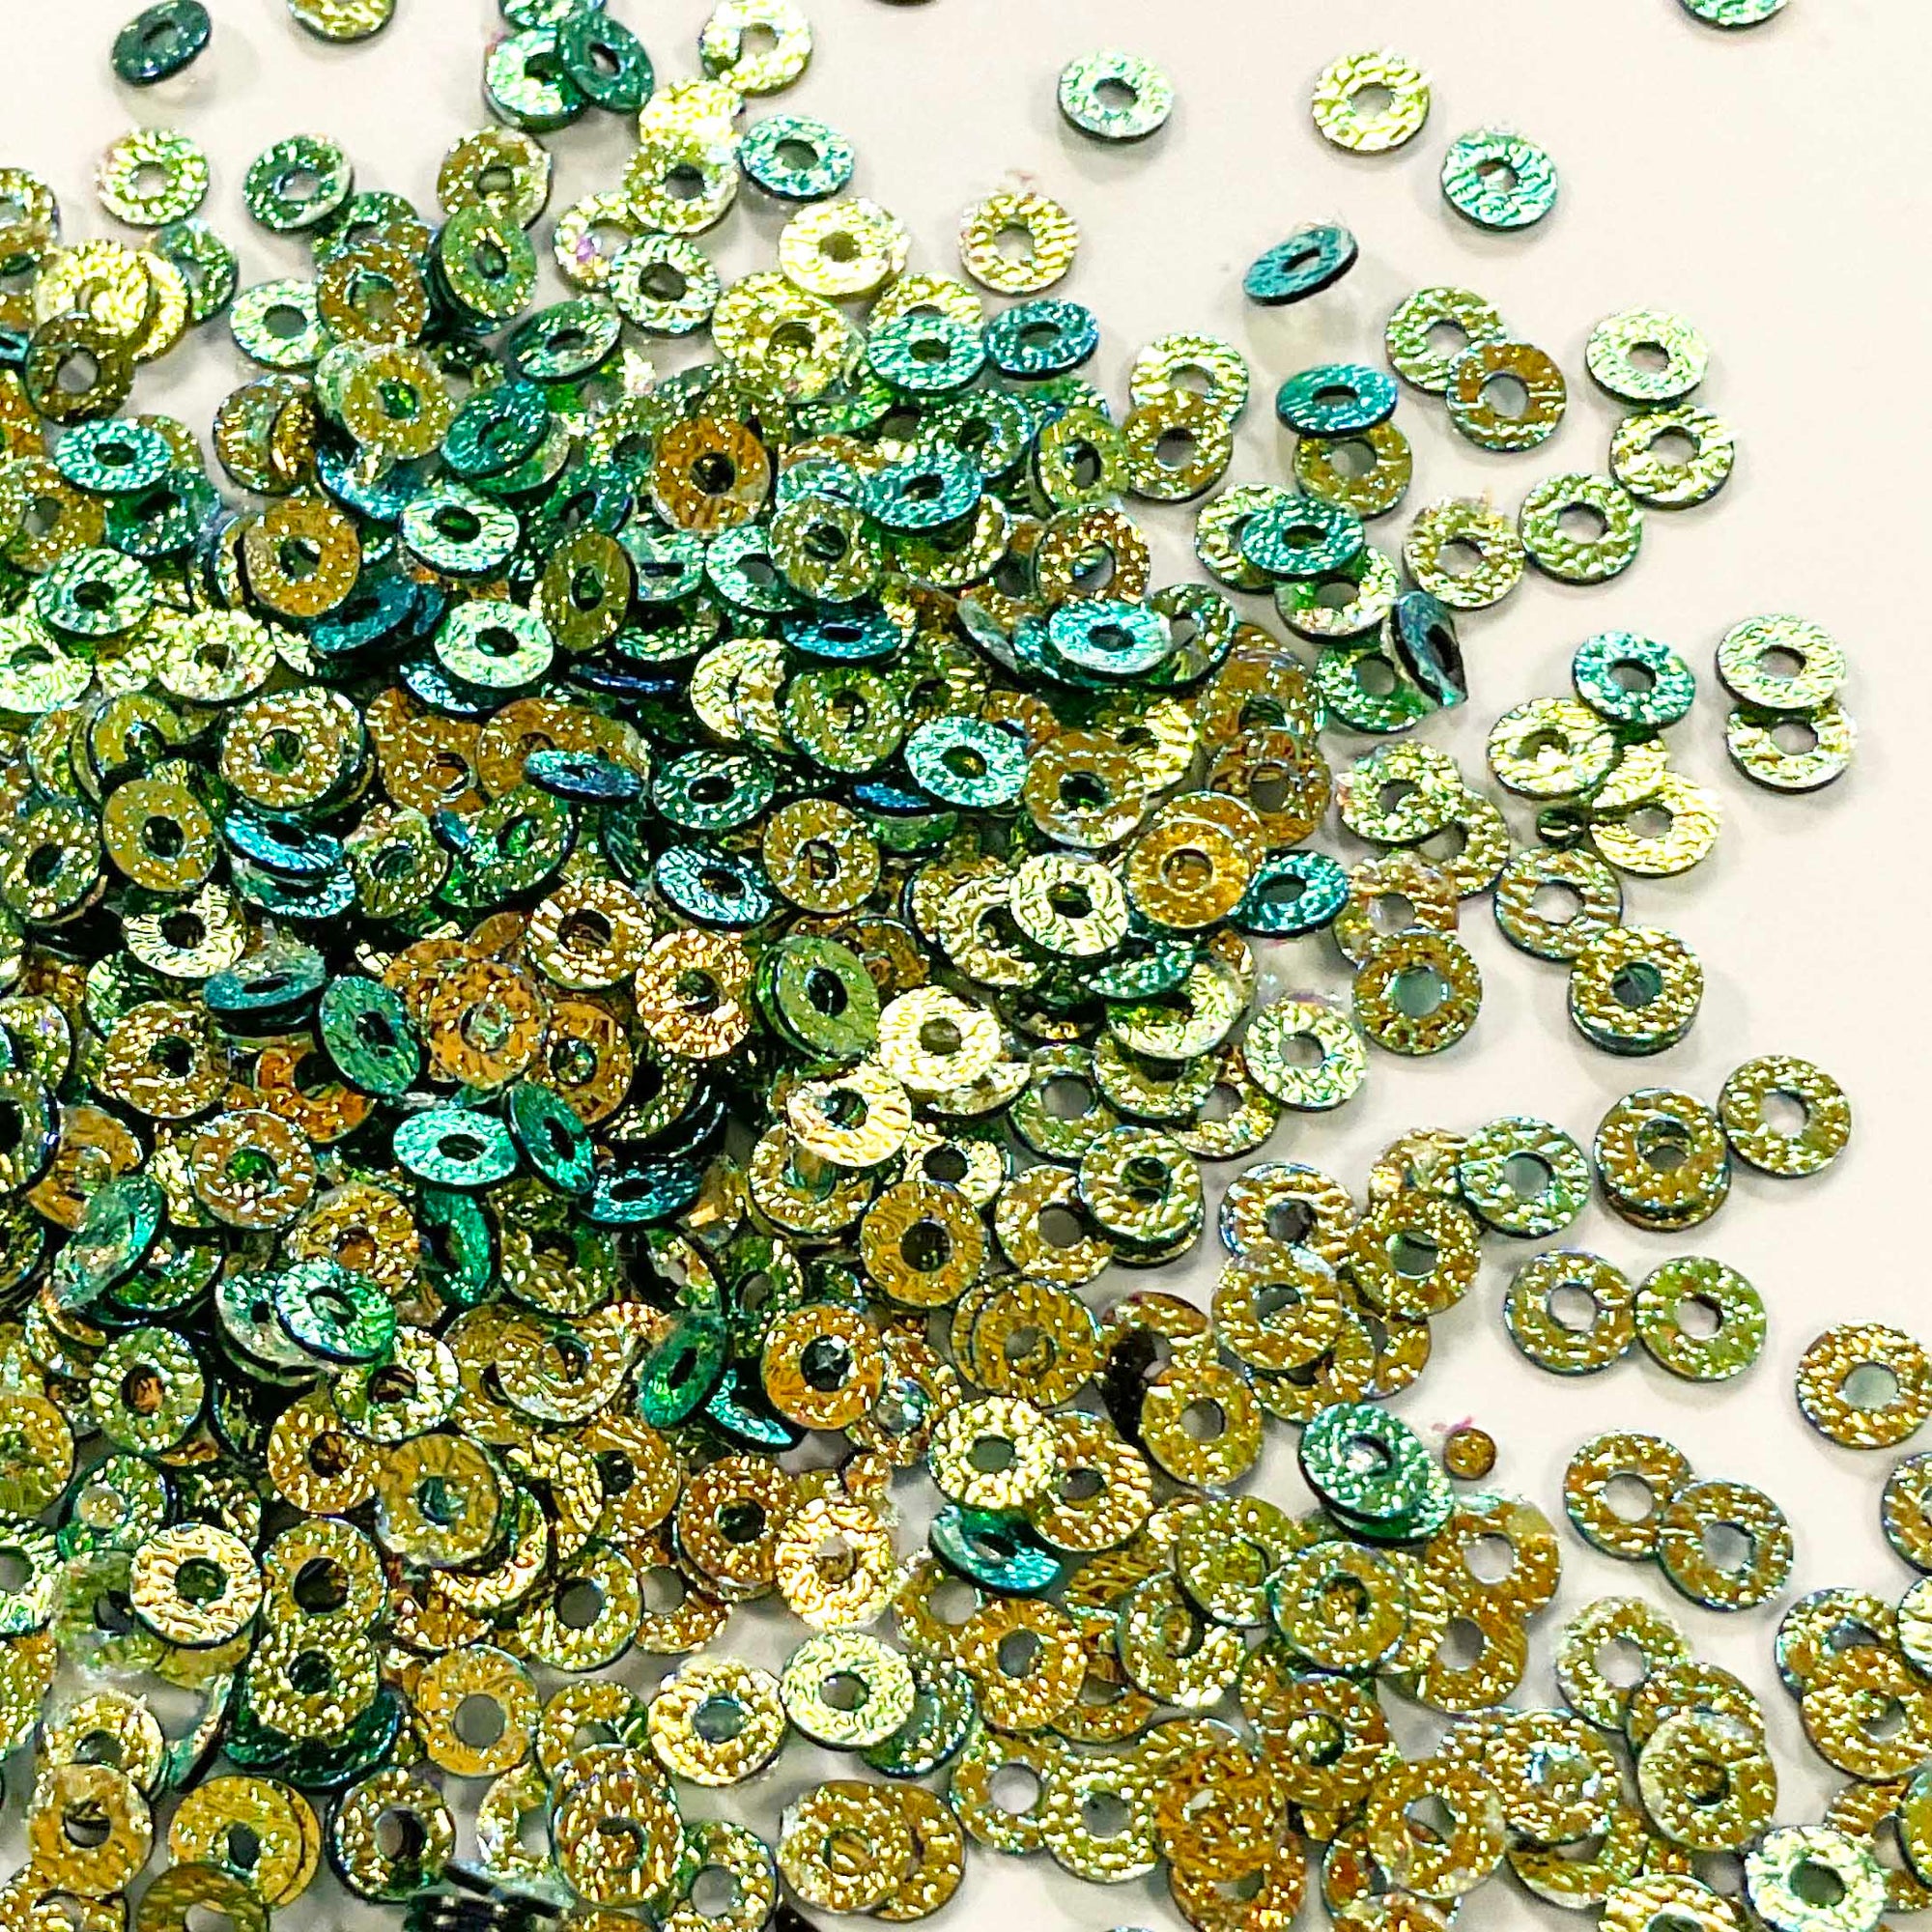 www.colourstreams.com.au Colour Streams Sequins Embellishments Costumes Mardi Gras Dancing Ballet Theatre Shows Drag Queen Bling S107 Flat Circle Shape Textured Green Gold Lights Iridescent Reflective Shiny Golds Greens 3mm